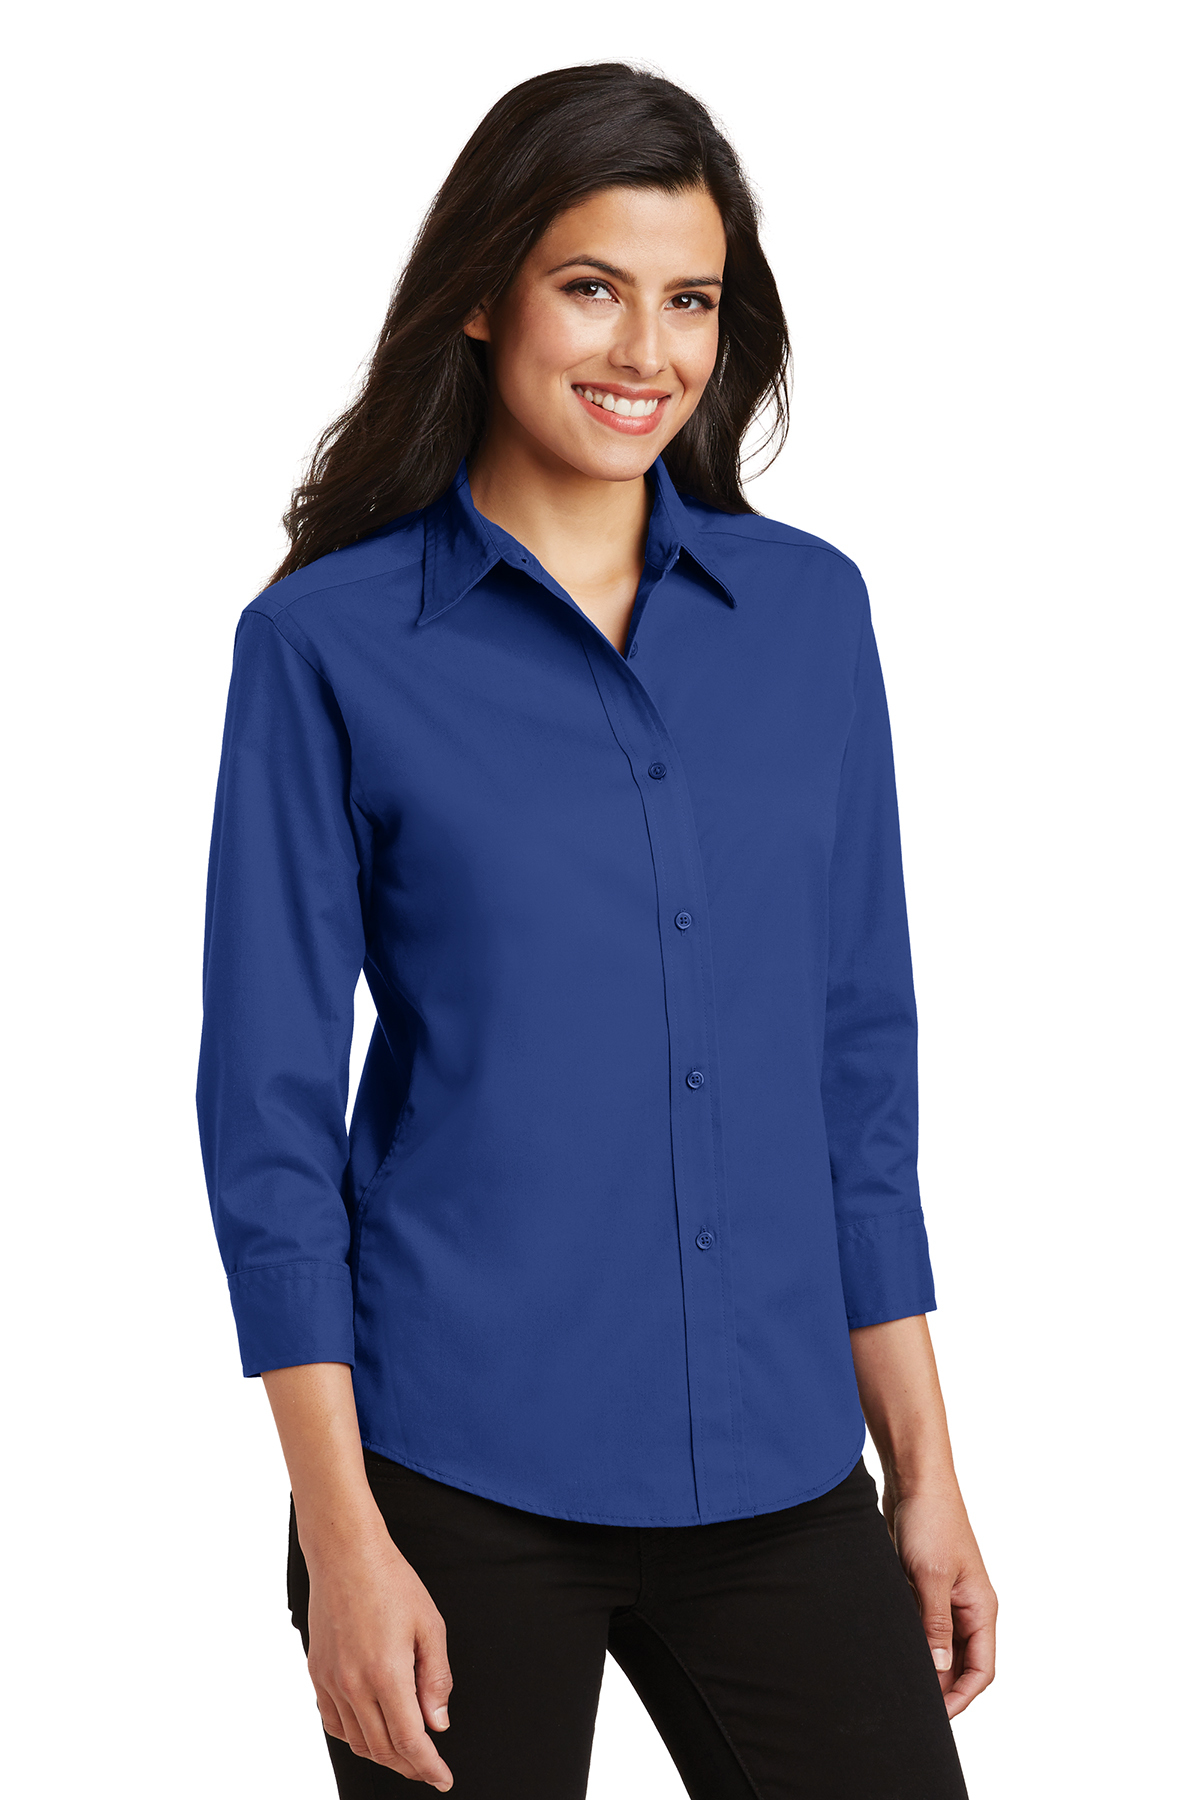 Port Authority Ladies 3/4-Sleeve Easy Care Shirt | Product | Company ...